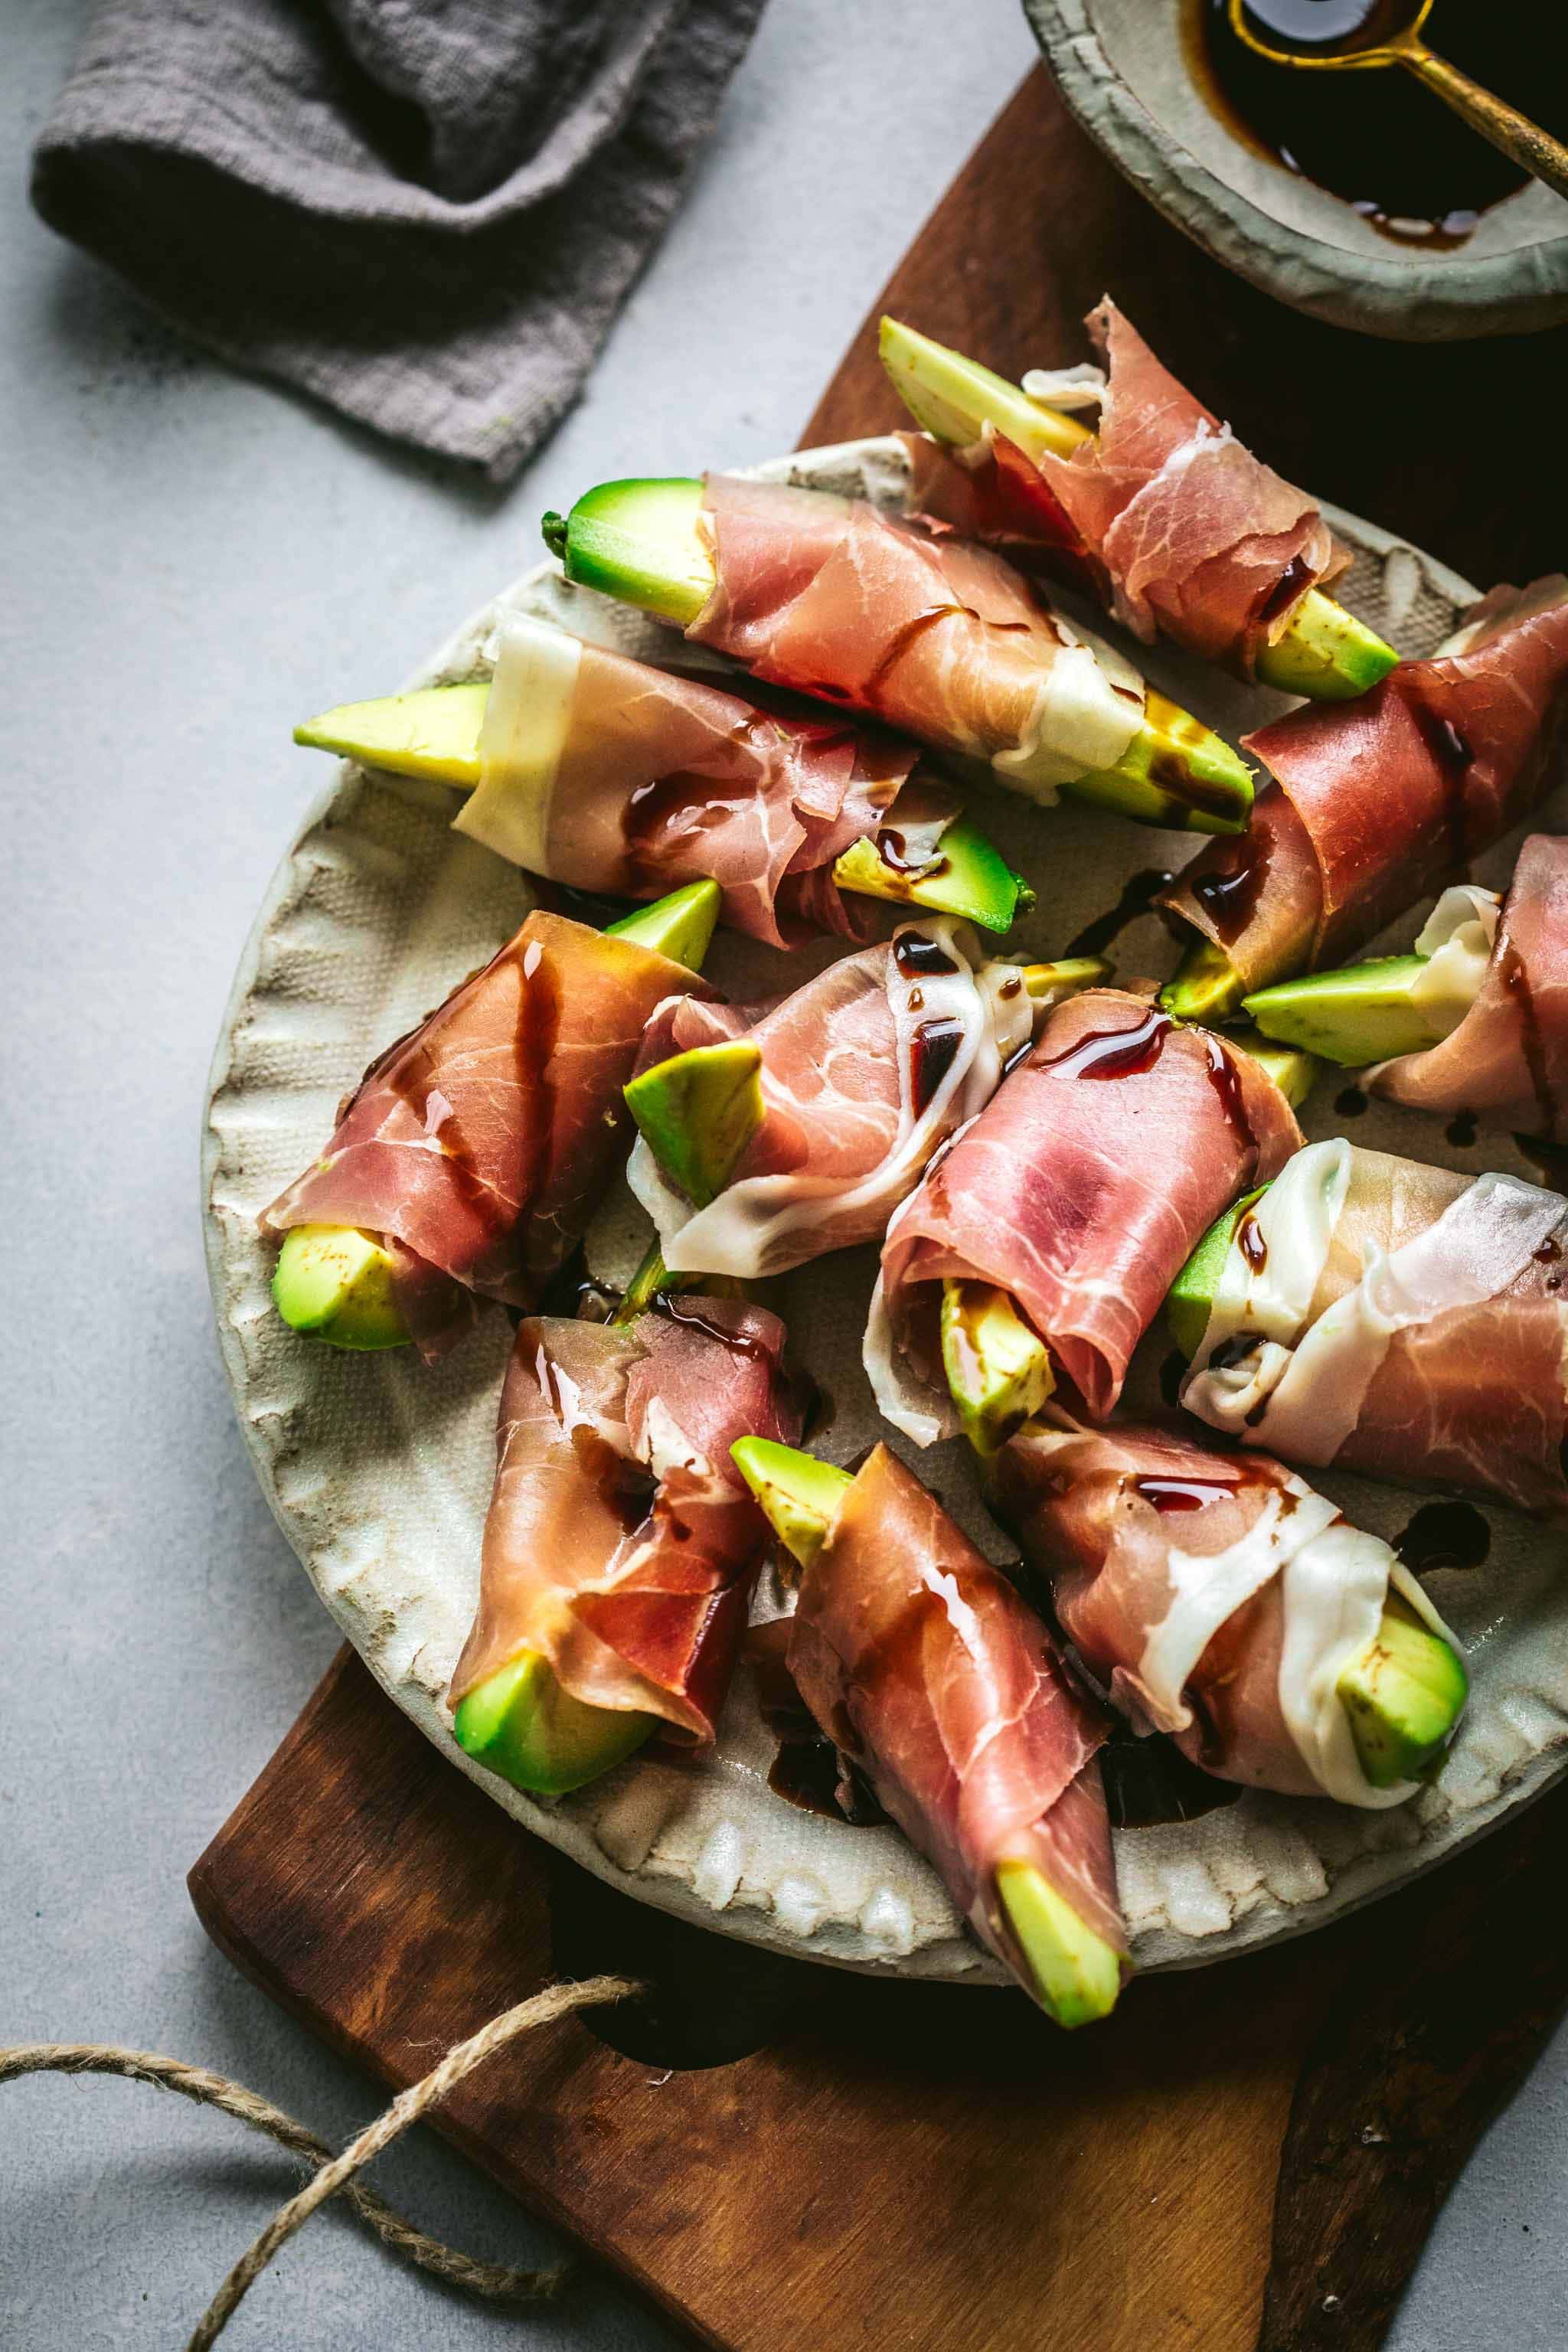 Avocado bites wrapped in prosciutto on wood cutting board.